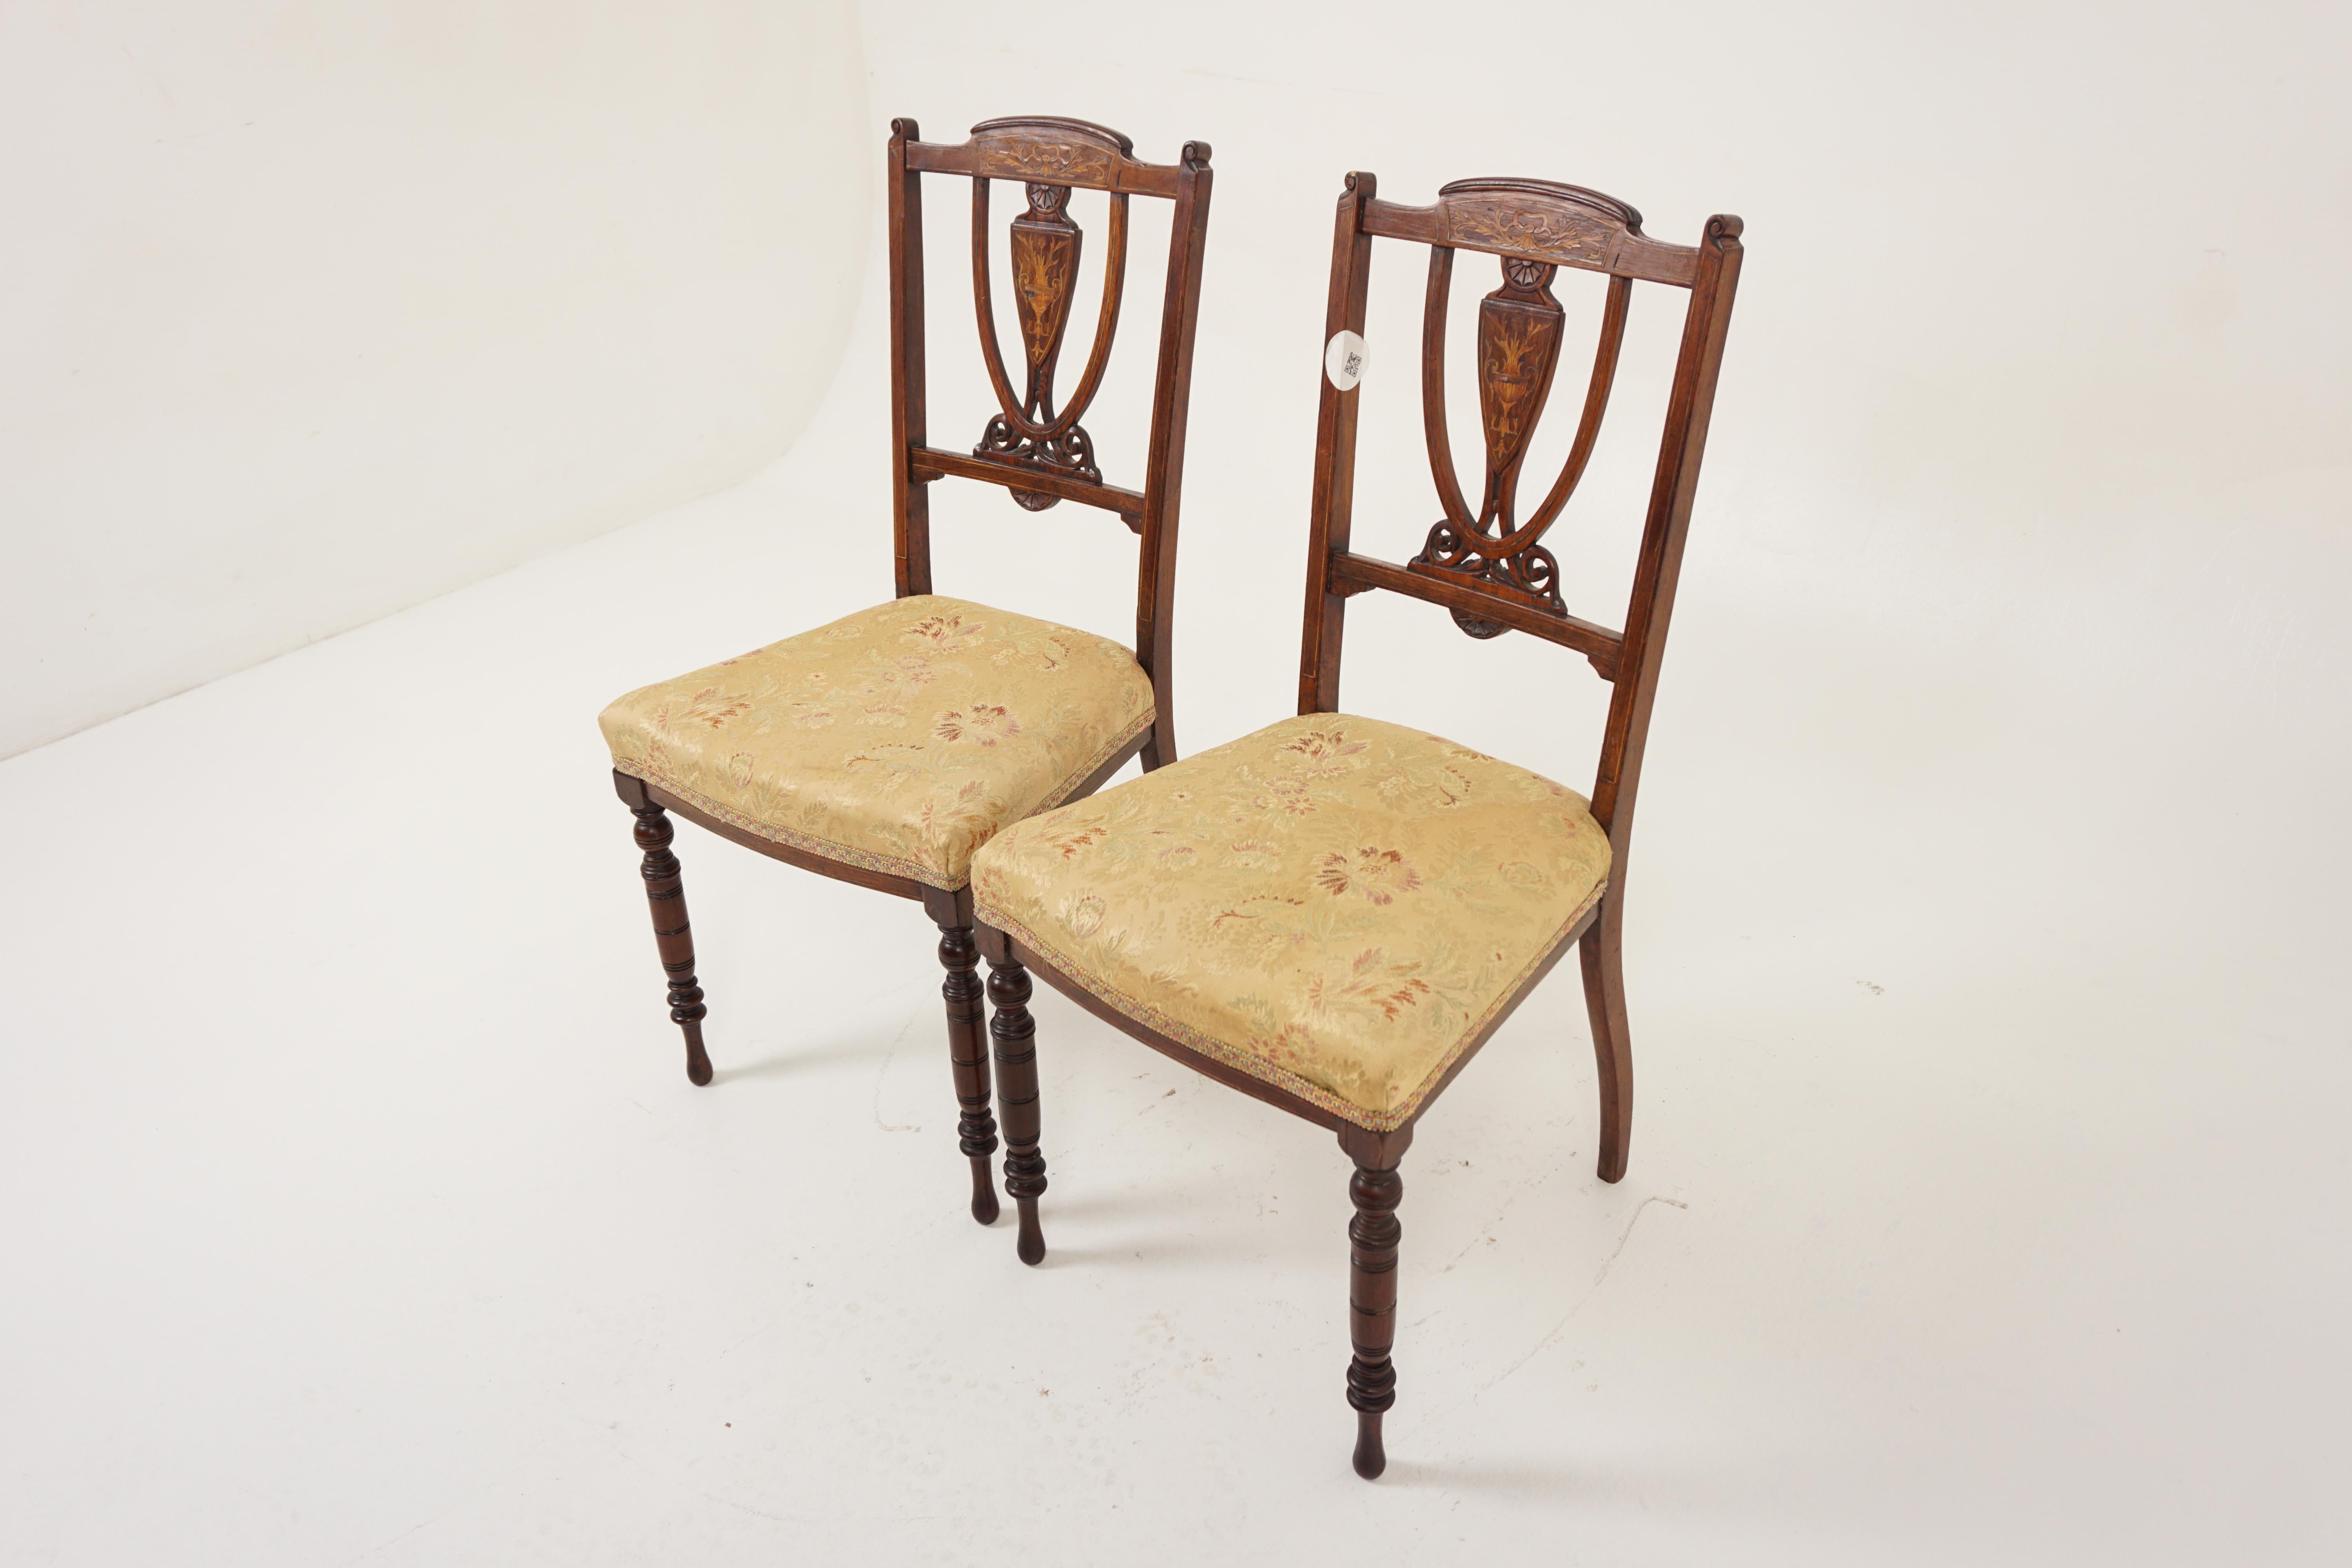 Antique Rosewood Chairs, Pair of Marquetry Inlaid Rosewood Side Chairs, Sheraton Revival Occasional Chairs, Scotland 1900, H1120
+ Scotland 1900
+ Rosewood and Veneer
+ Original Finish
+ Incredibly fine carving on the pierced backs with